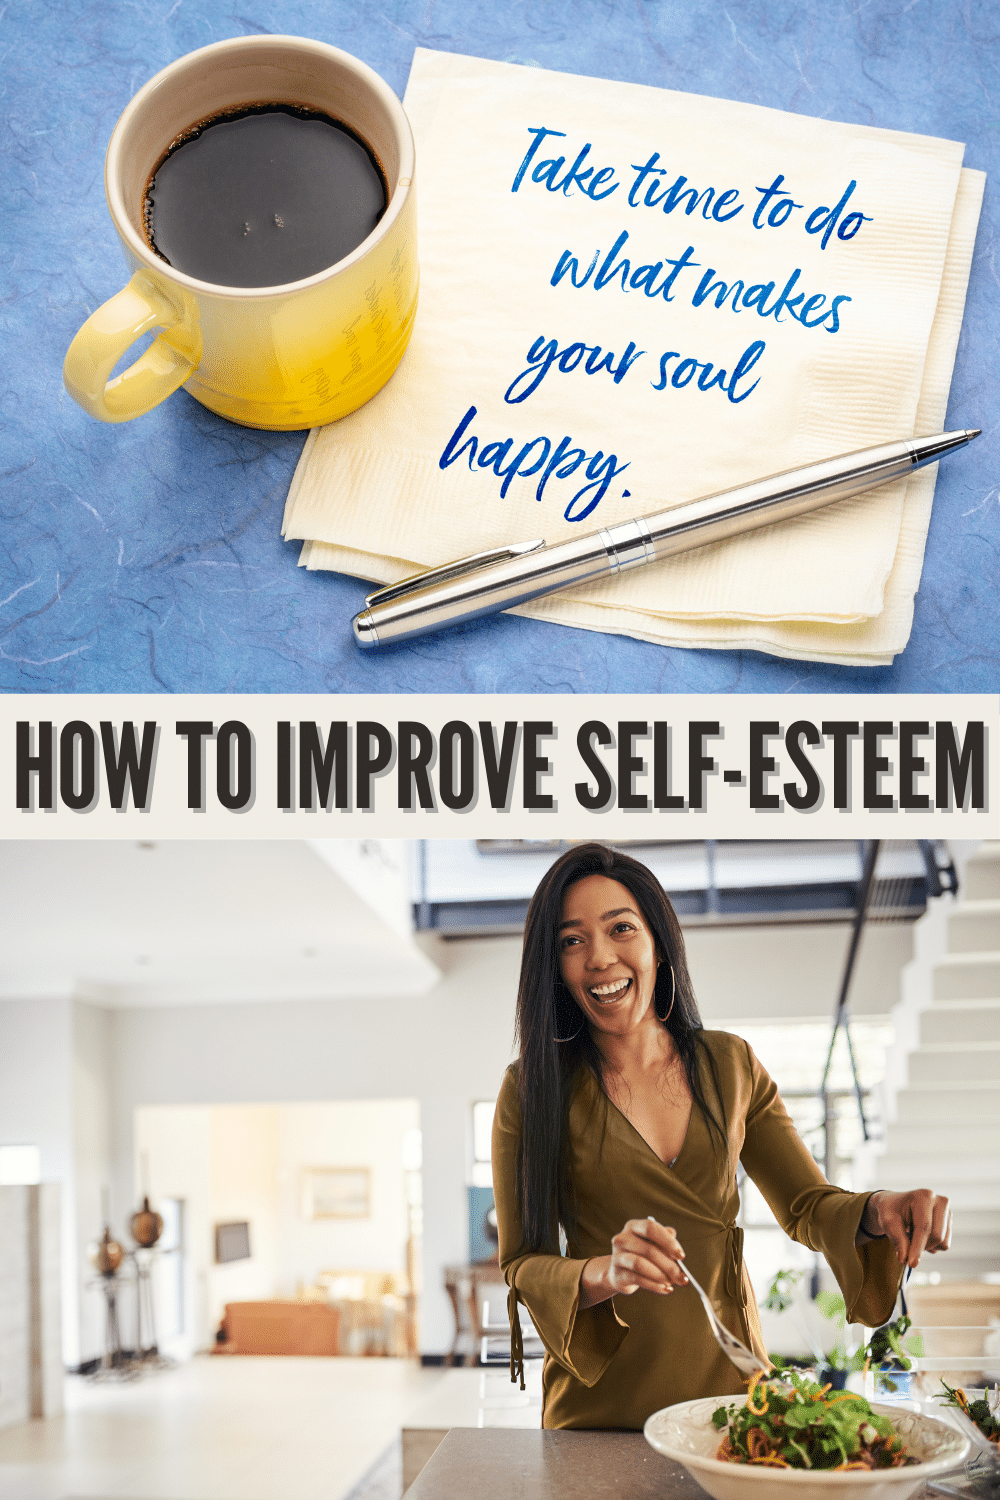 Simple strategies for improving self-esteem that you can start practicing right away to build confidence and self respect. #selfesteem #improvingselfesteem #confidence #selfrespect via @wondermomwannab